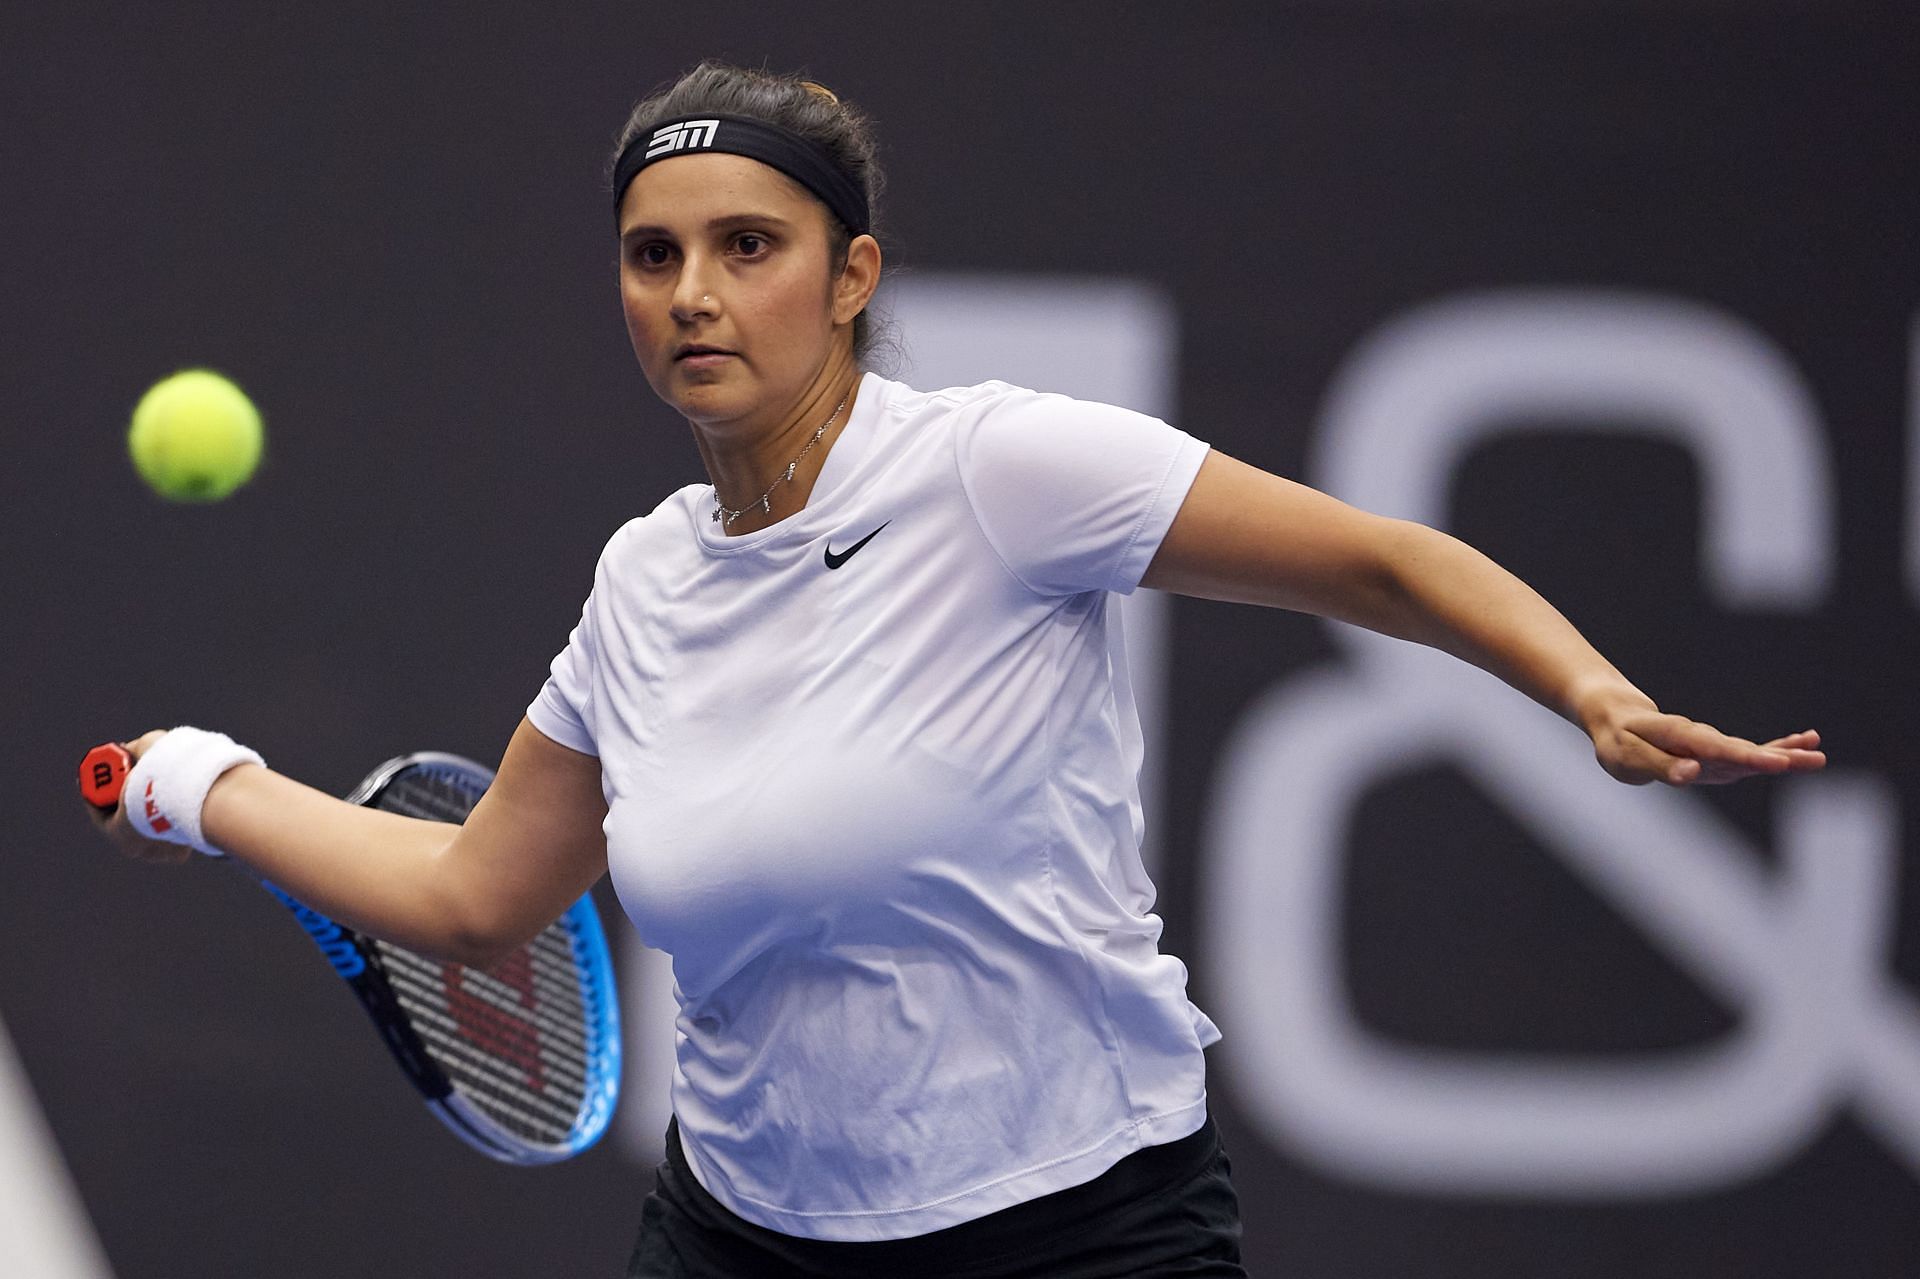 Sania Mirza is set to retire at the end of the season.